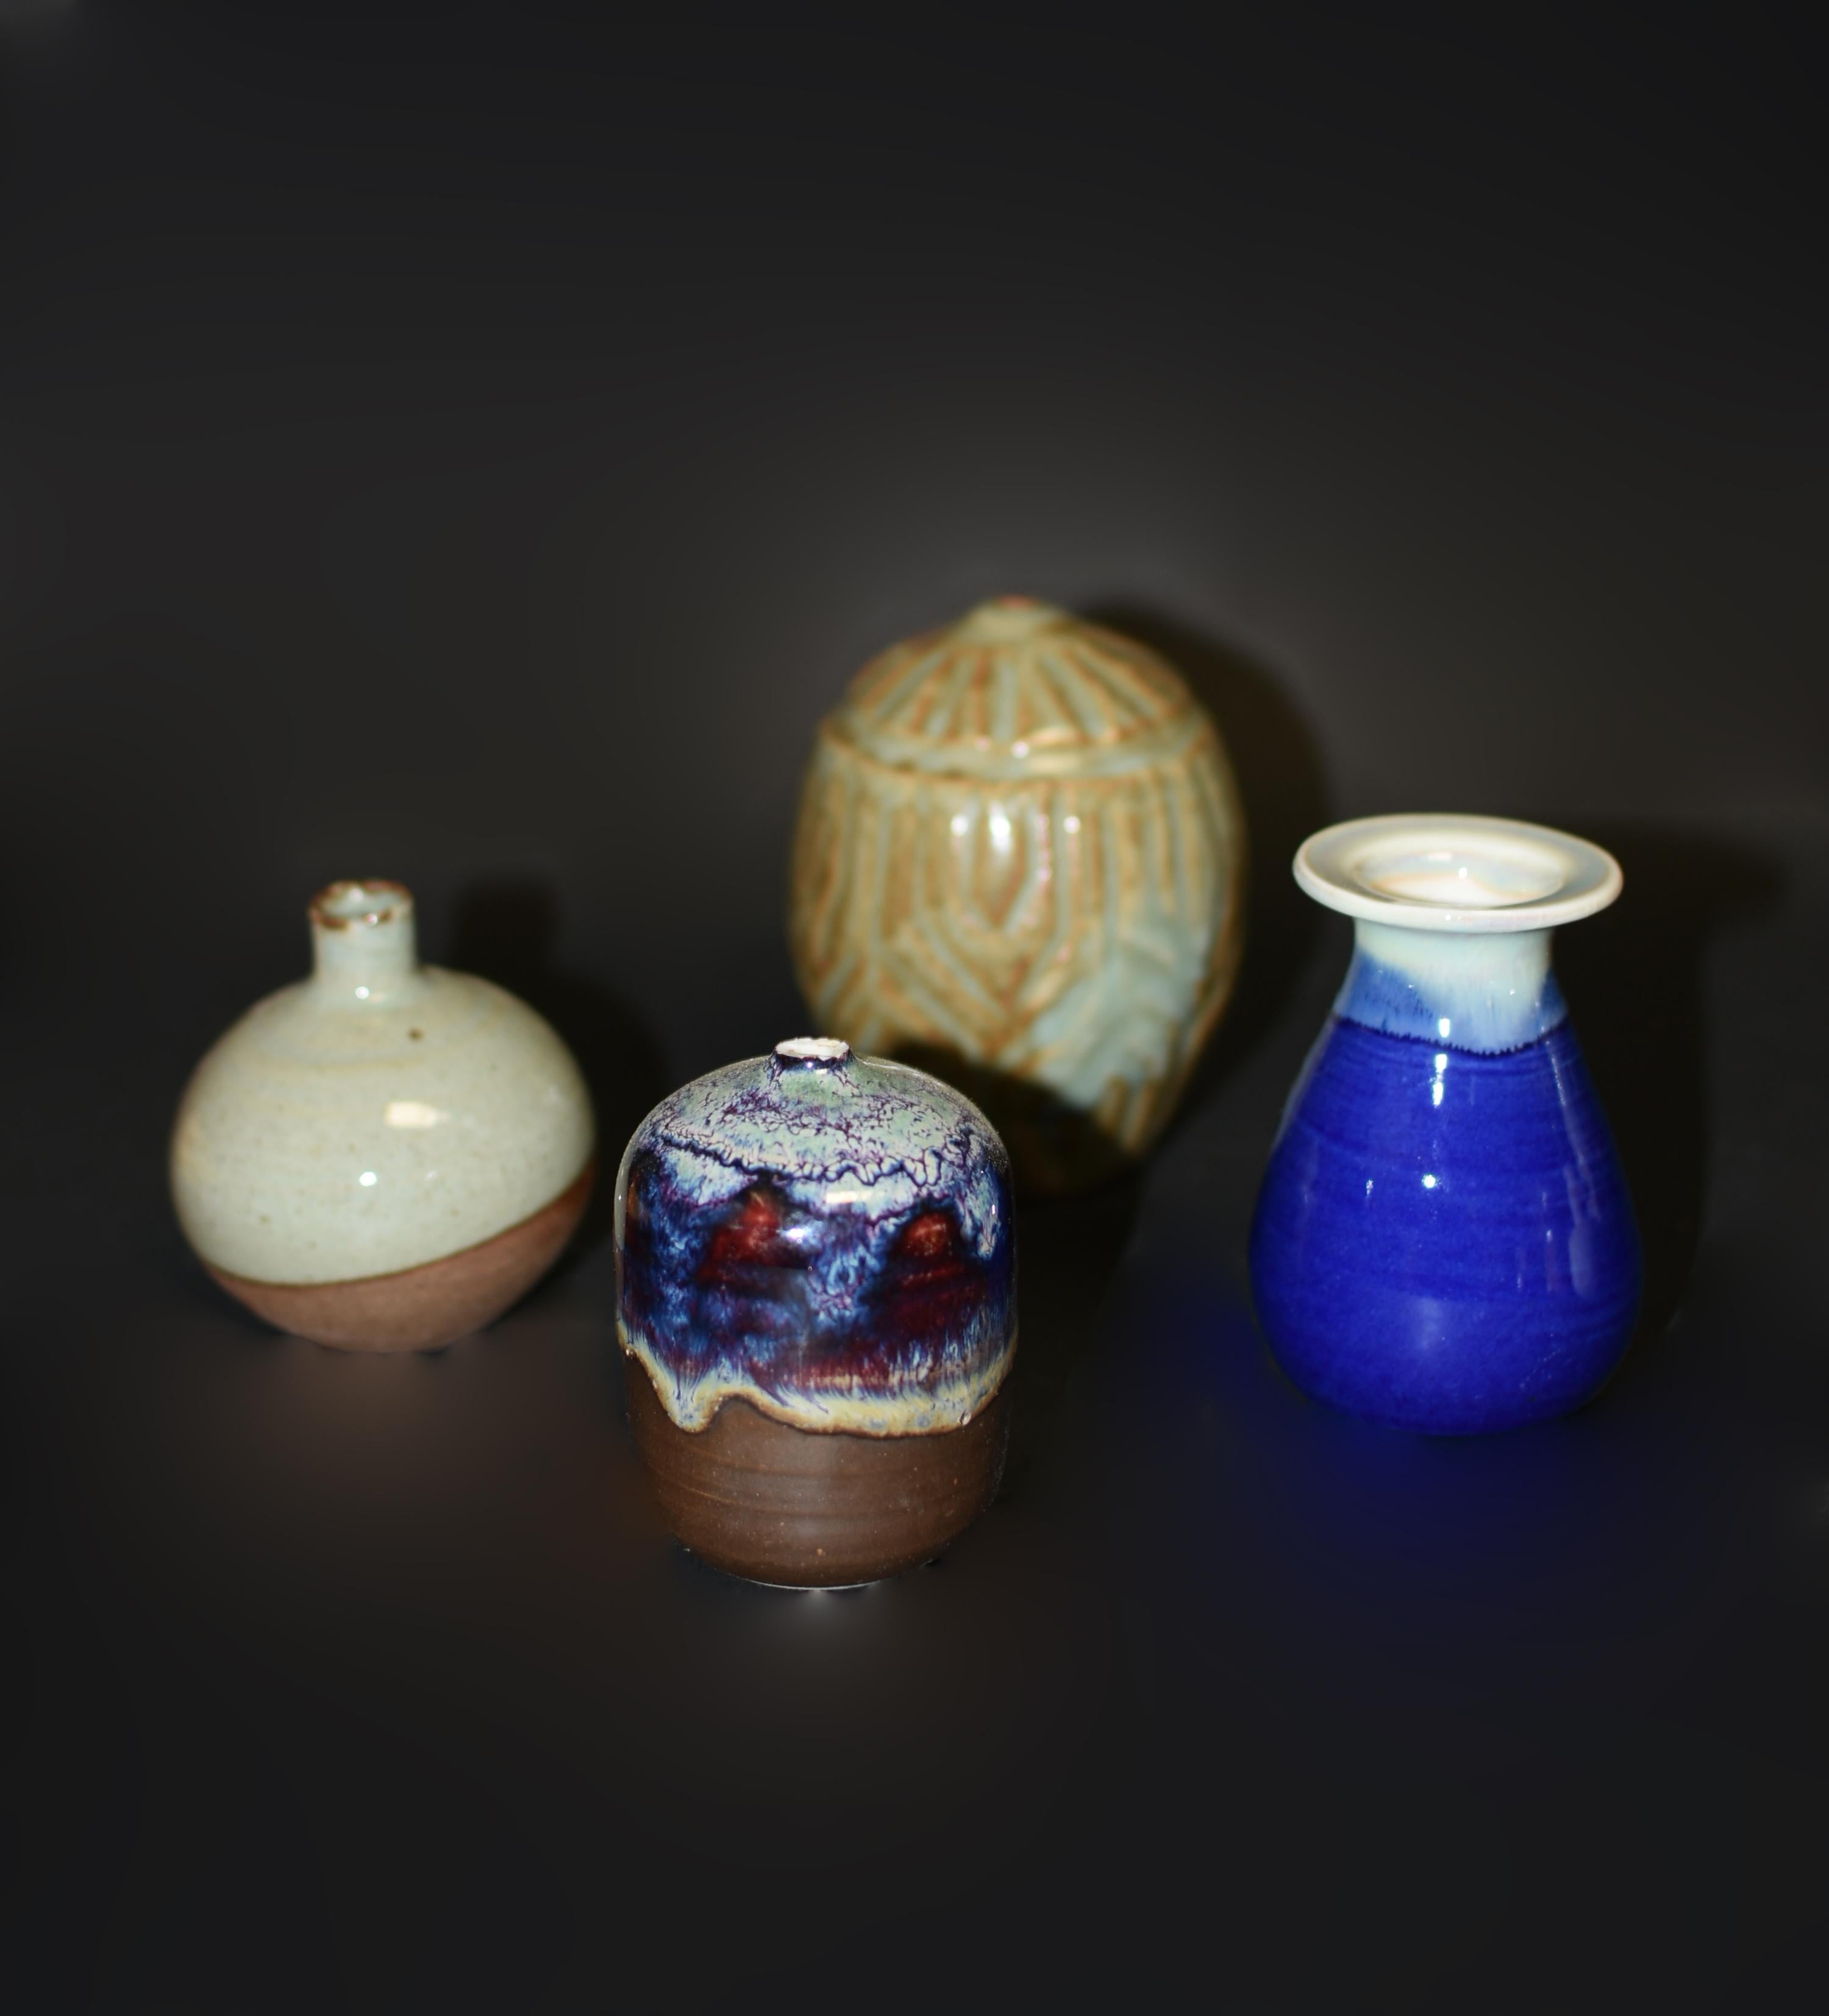 A collection of 5 small Japanese wabi sabi glazed pottery vases in beautiful blue, mottled green, celadon, and polychrome dripped glaze. The Japanese wabi sabi methodology celebrates life's natural occurrence. It honors genuine force of nature